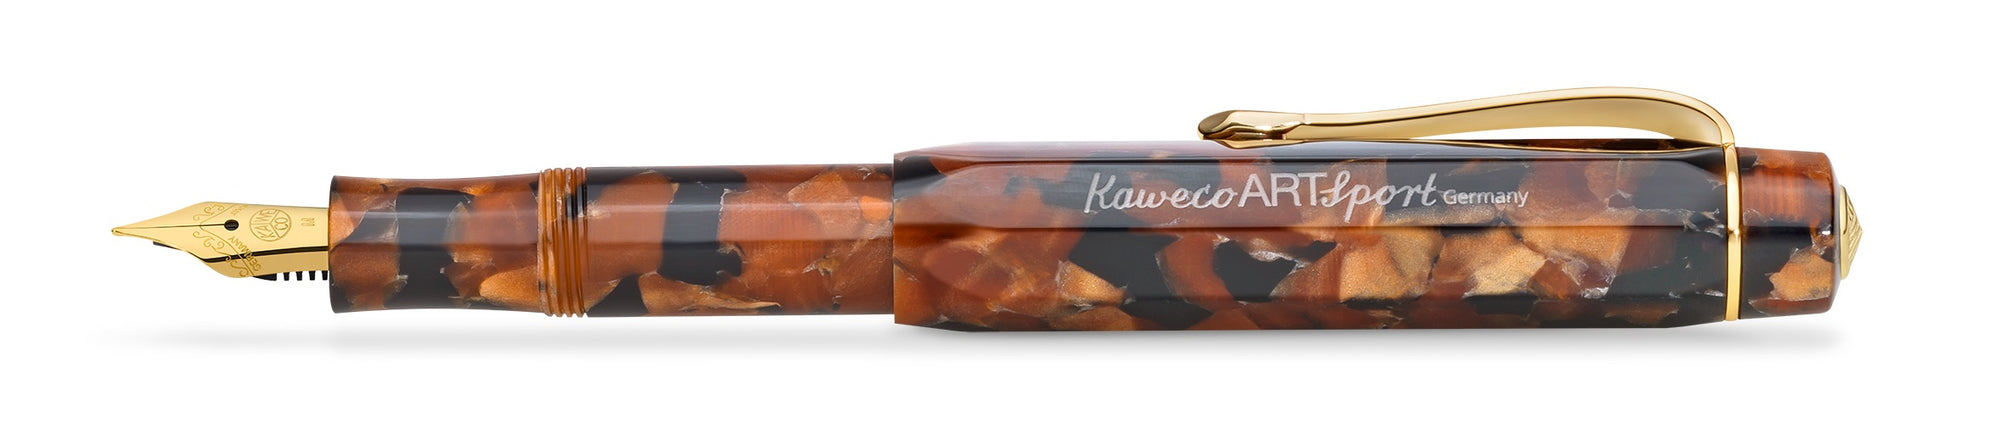 Kaweco Art Sport Fountain Pen - Hickory Brown - Blesket Canada